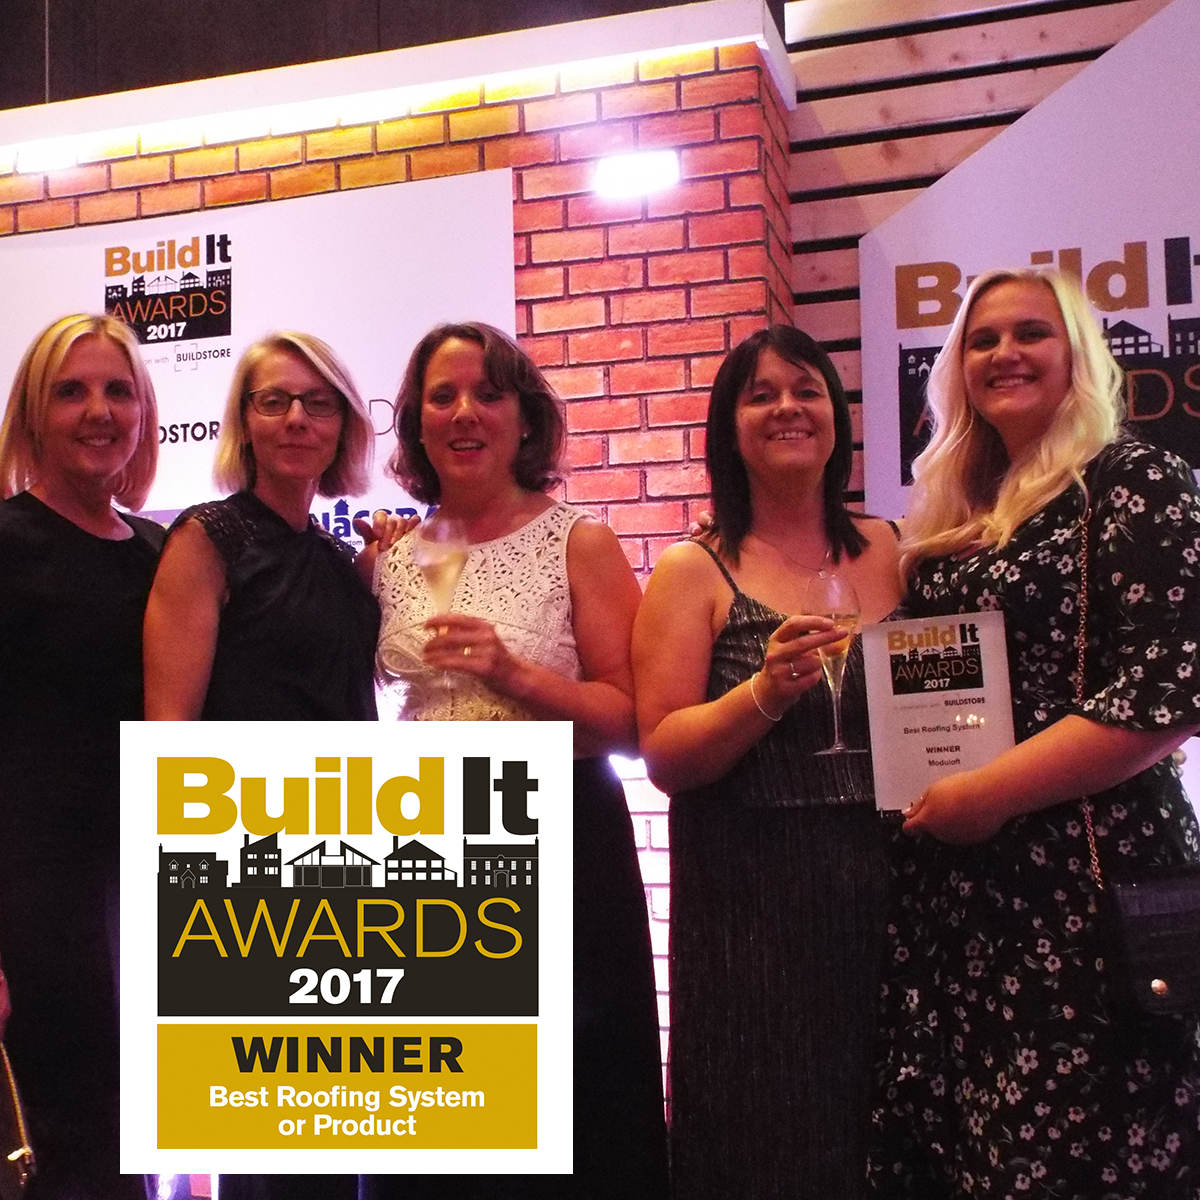 loft conversion awards win: Build It awards Winner for best roofing system